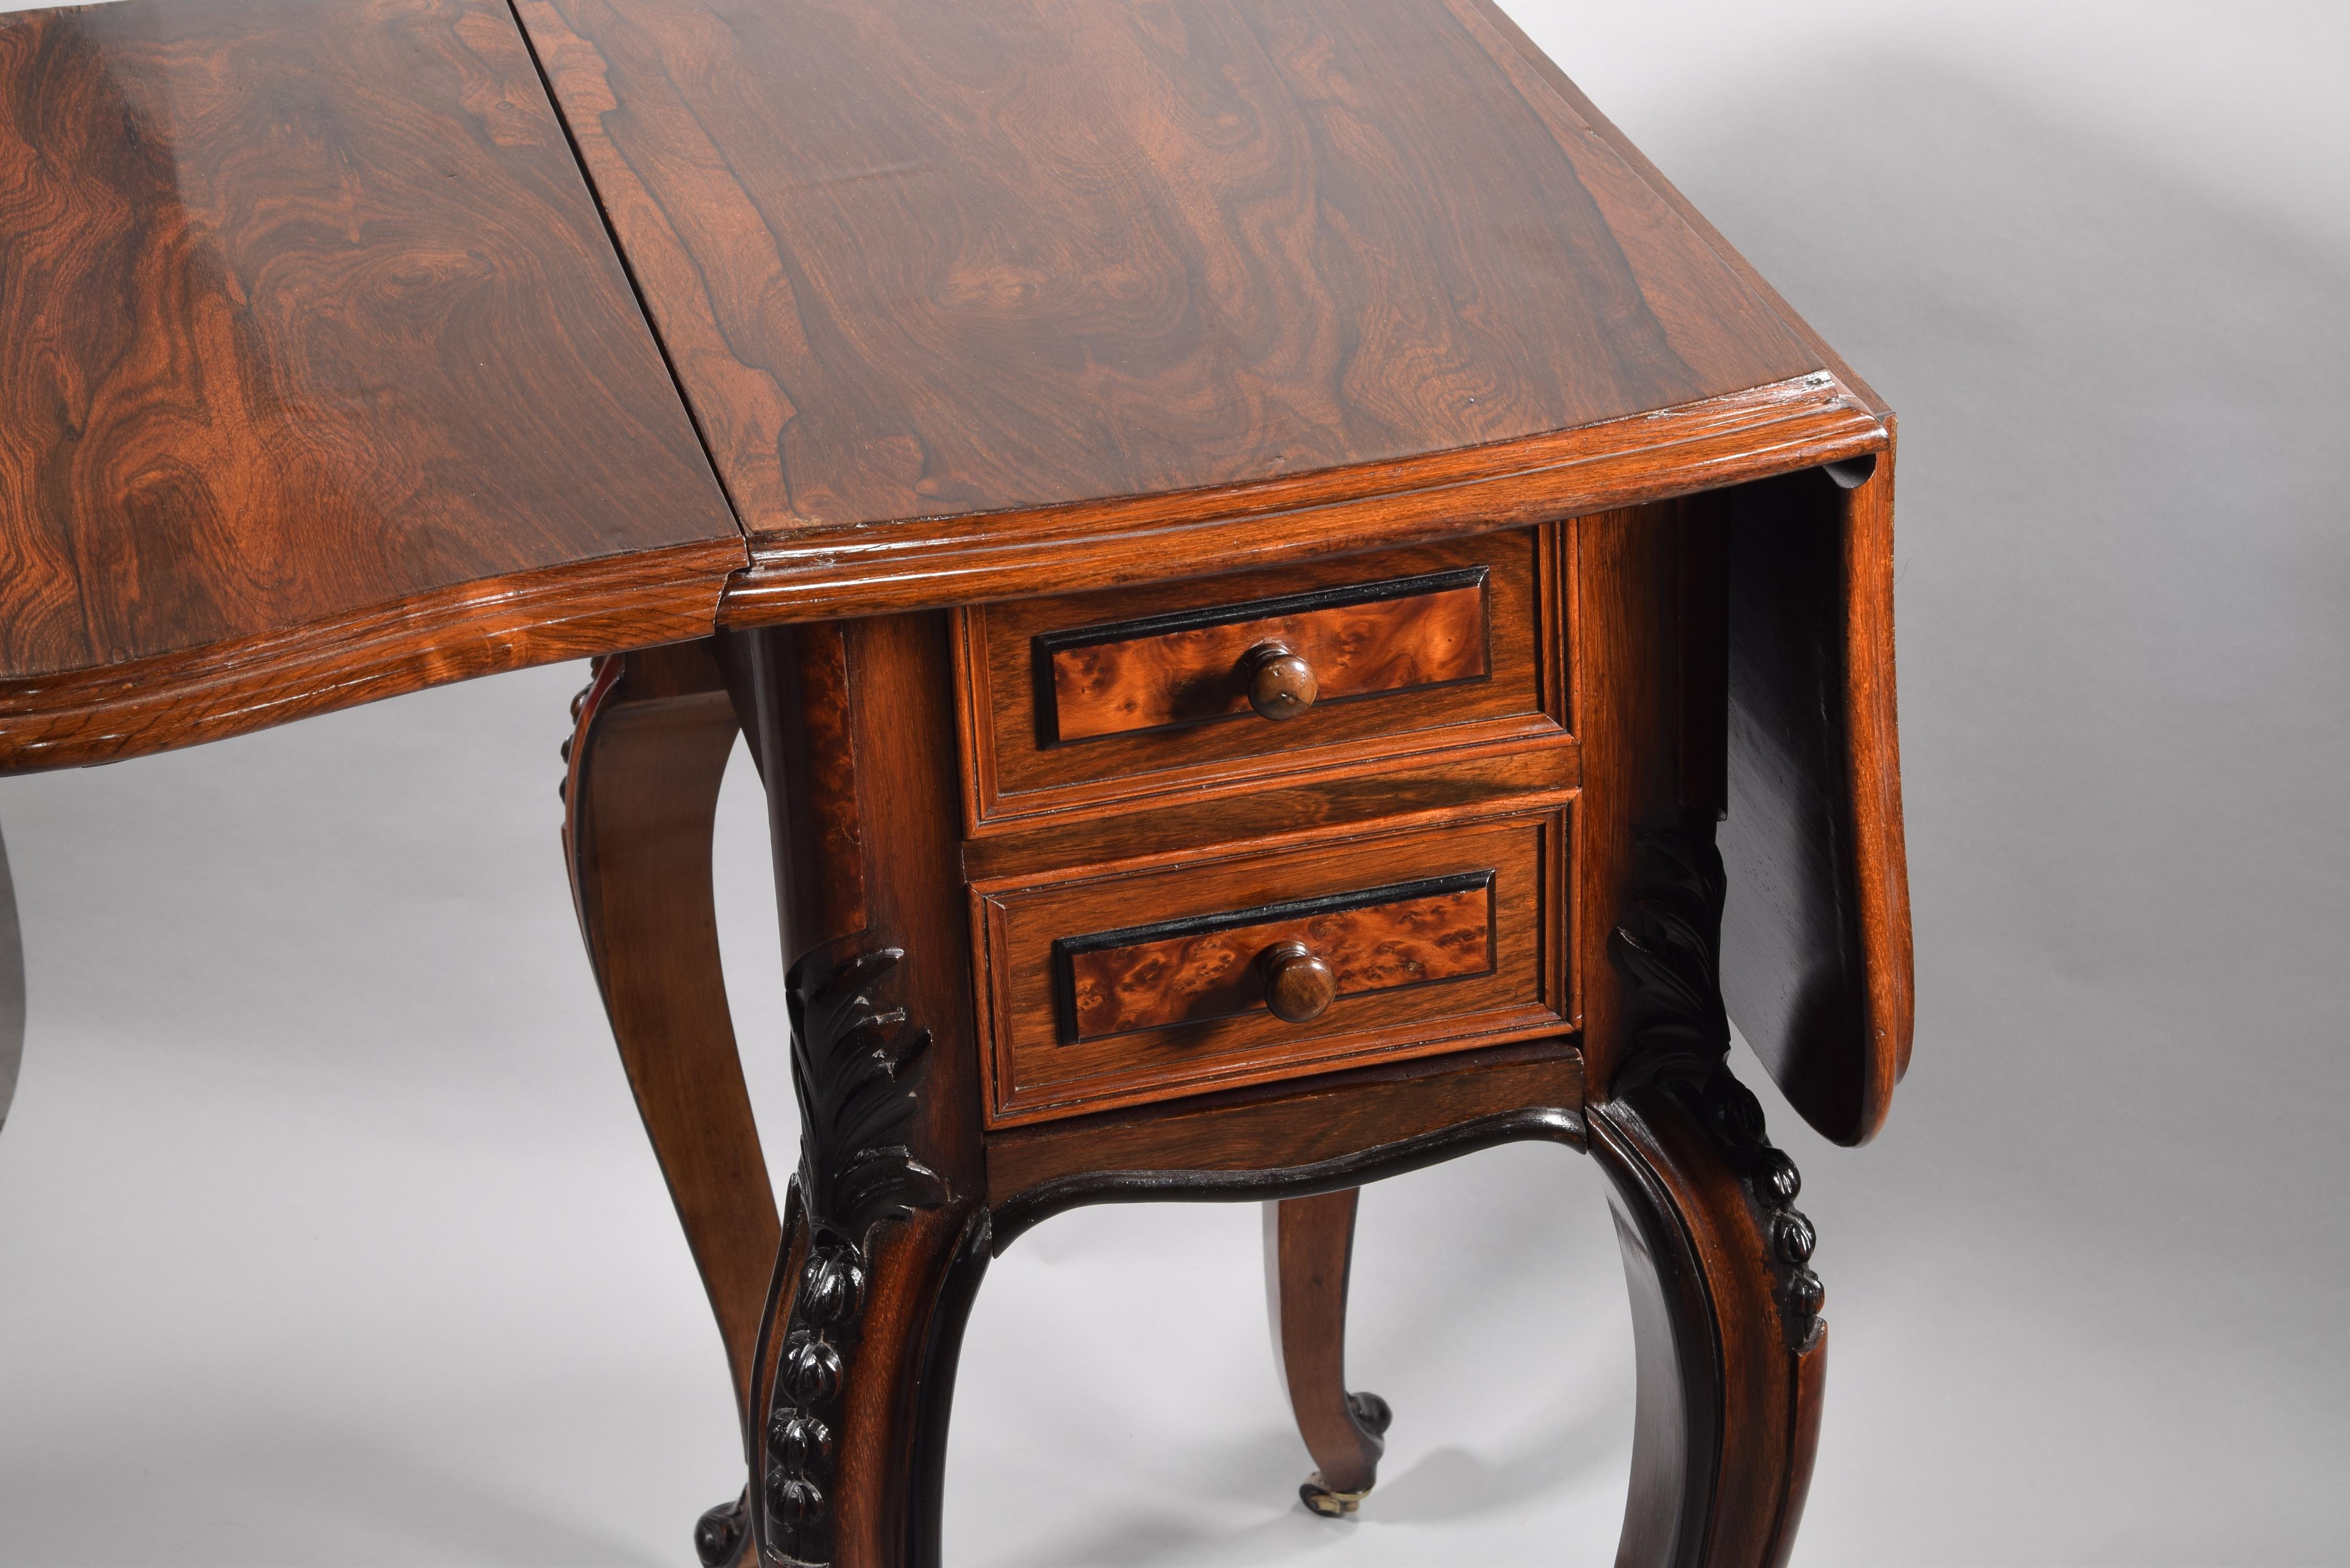 Sewing Table with Wings, Palosanto or Rosewood Wood, 19th Century For Sale 4